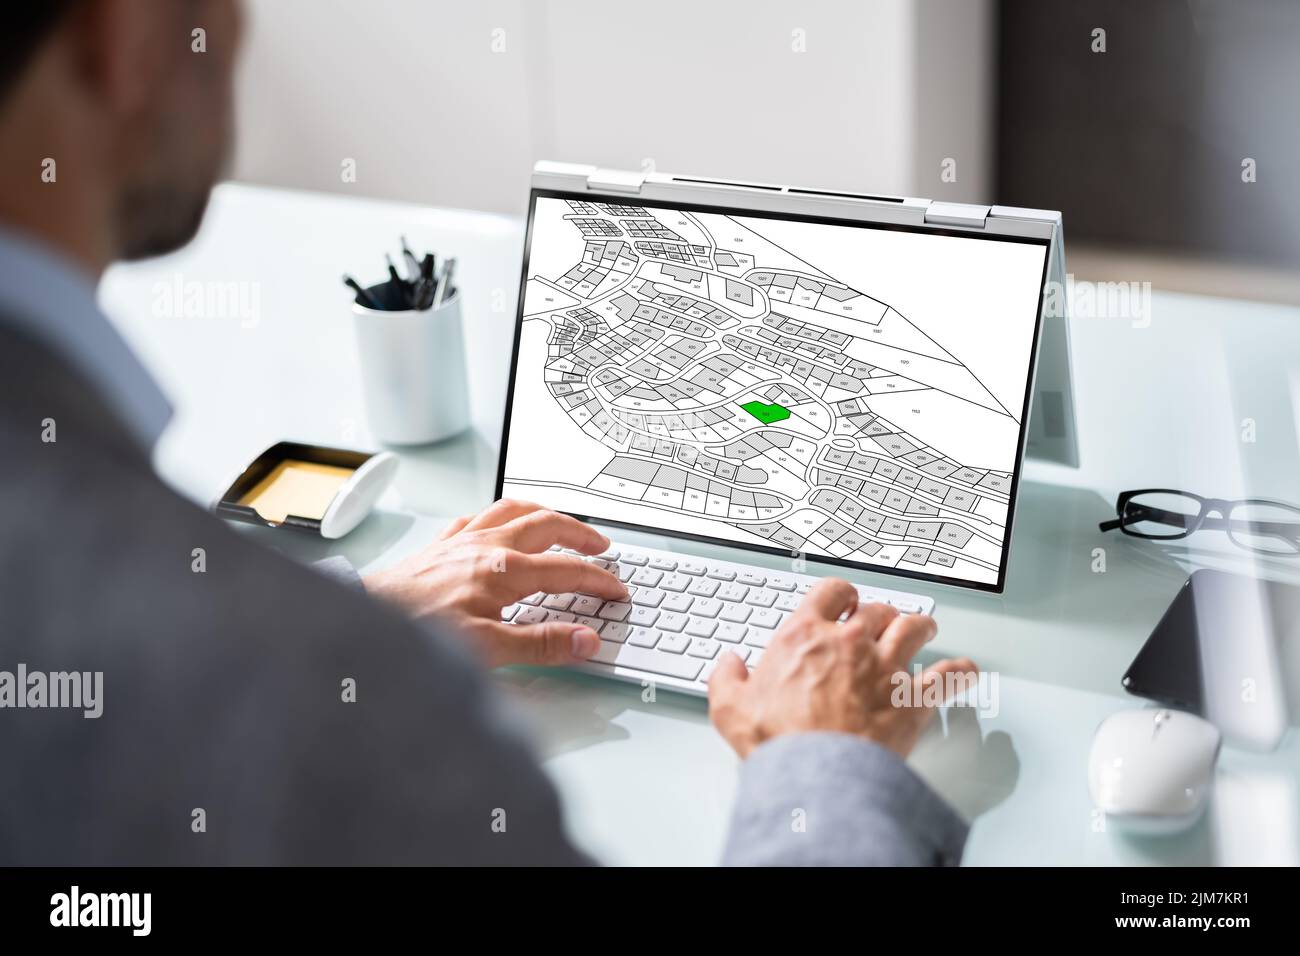 Cadastre Map And City Building Survey On Laptop Stock Photo